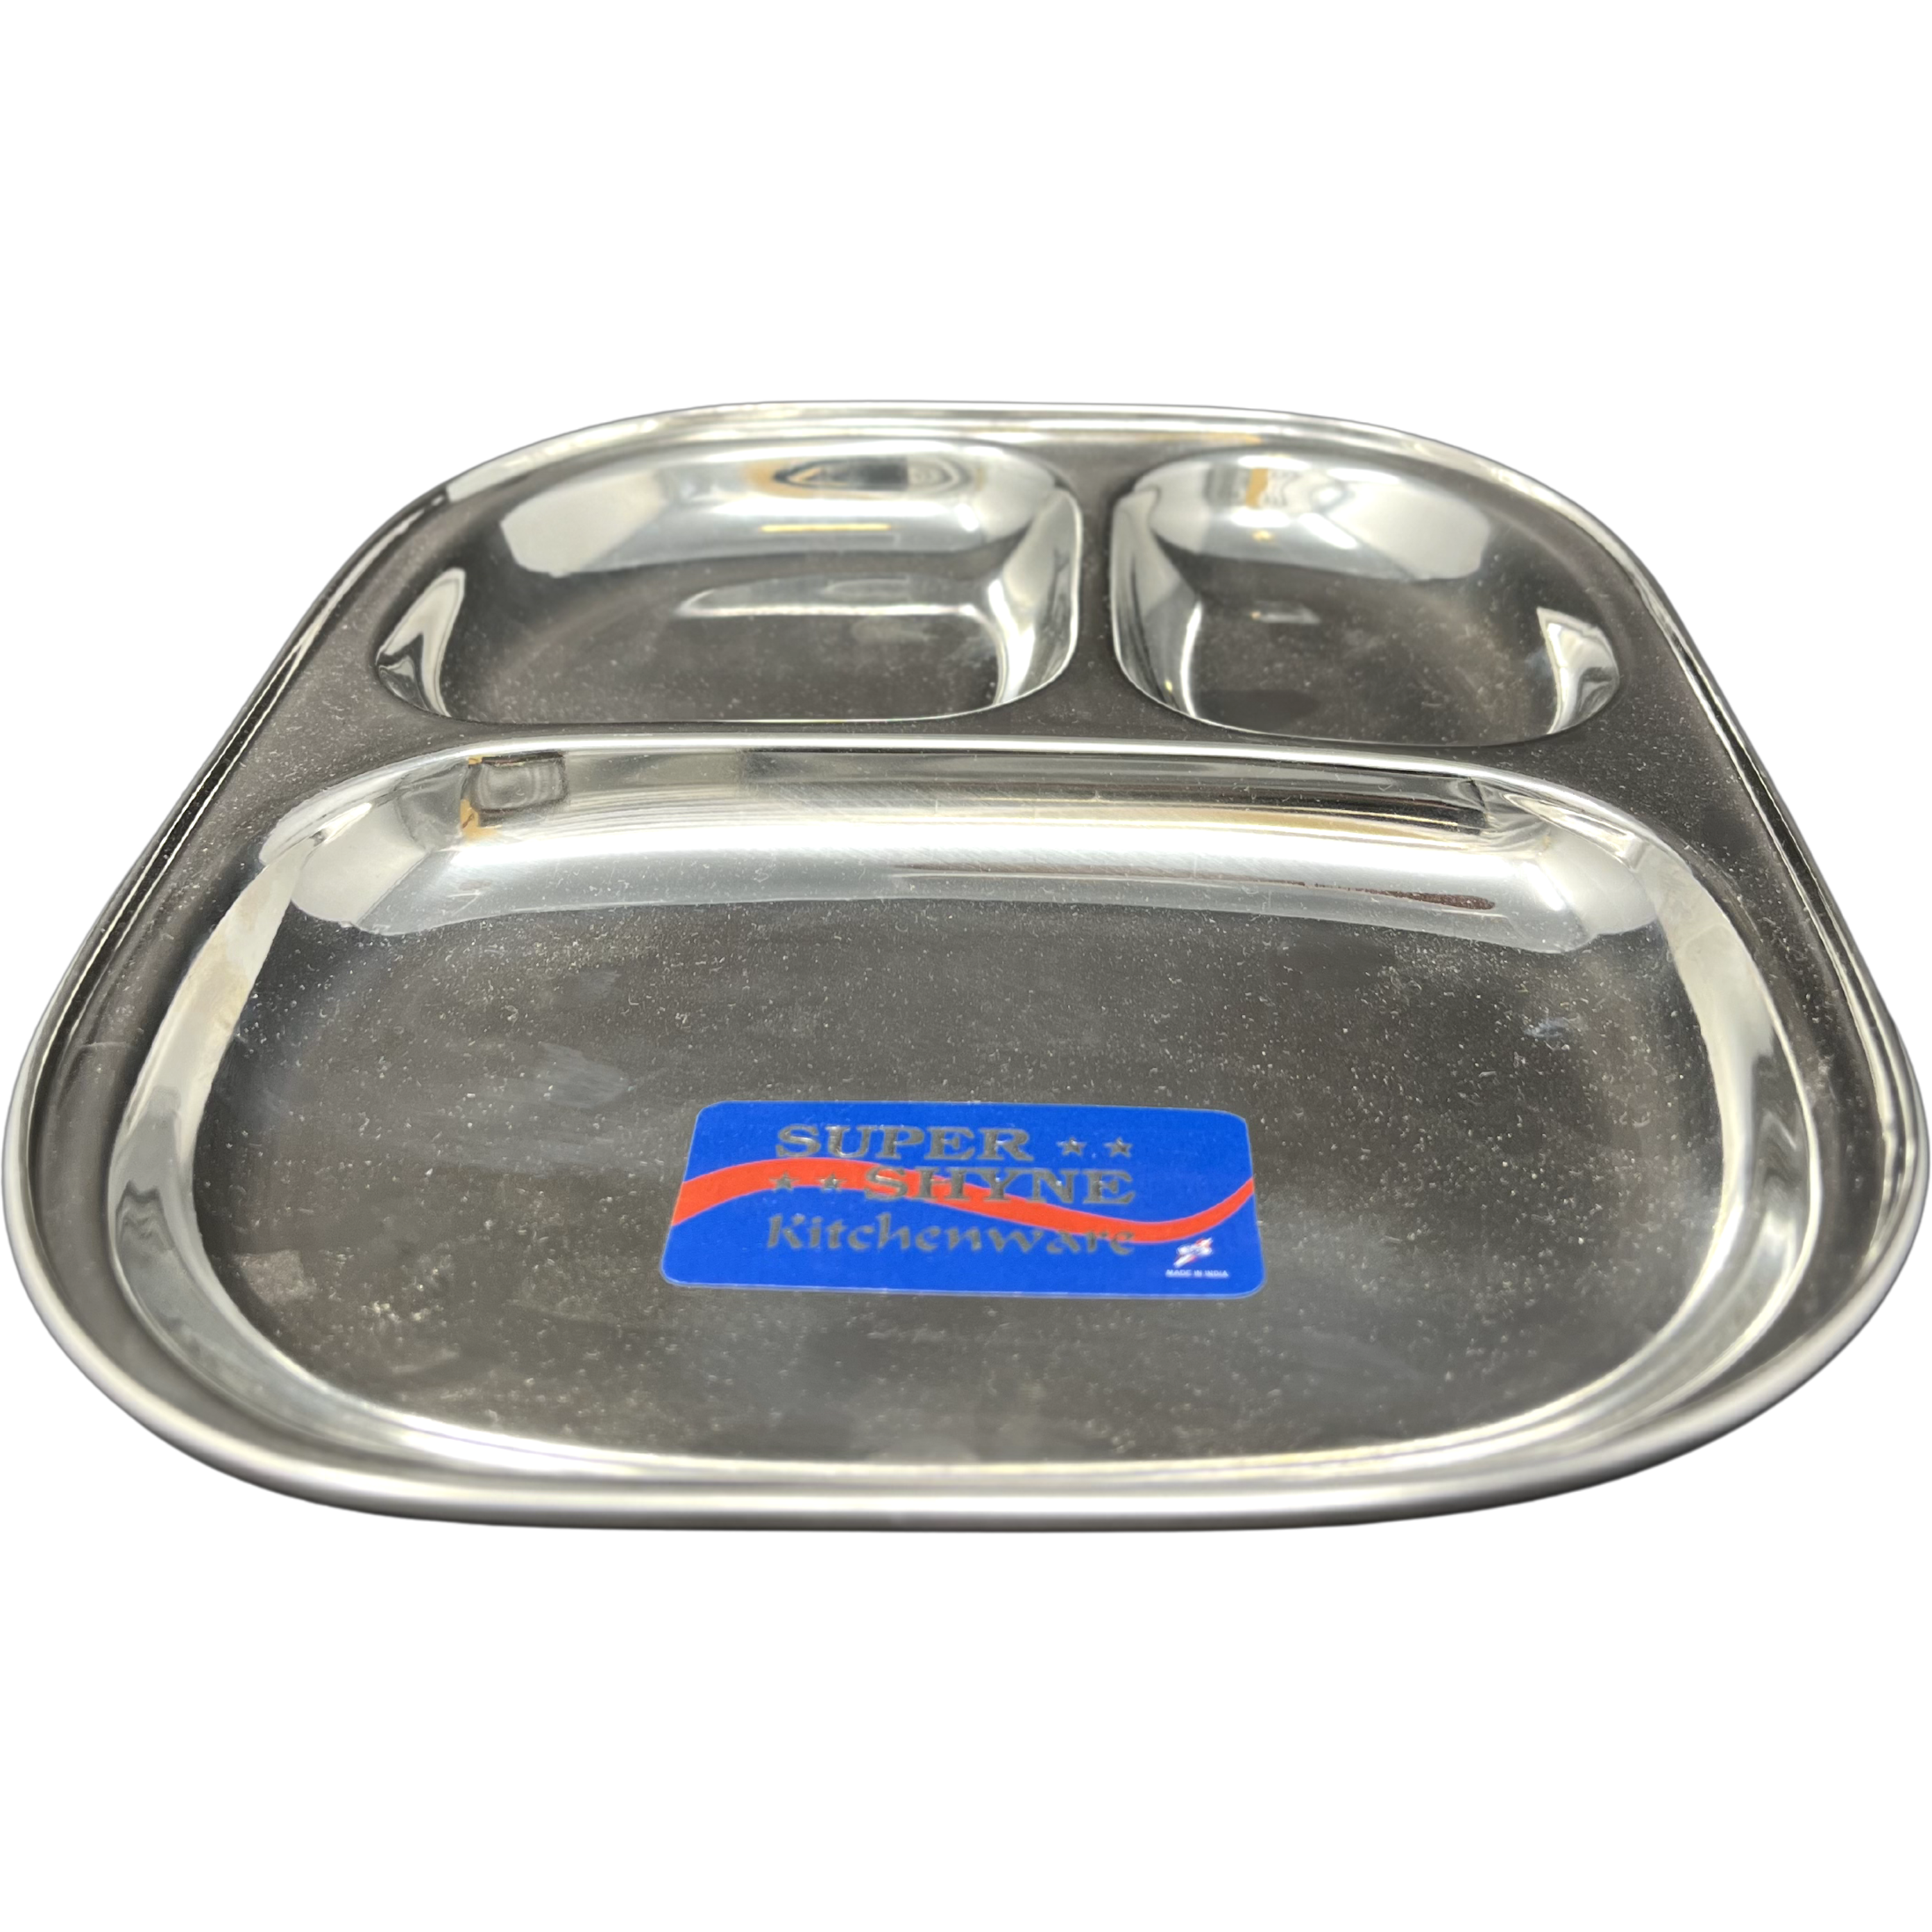 Case of 3 - Super Shyne Stainless Steel 3 Section Rectangular Lunch Tray - 8.25 Inch X 9.75 Inch